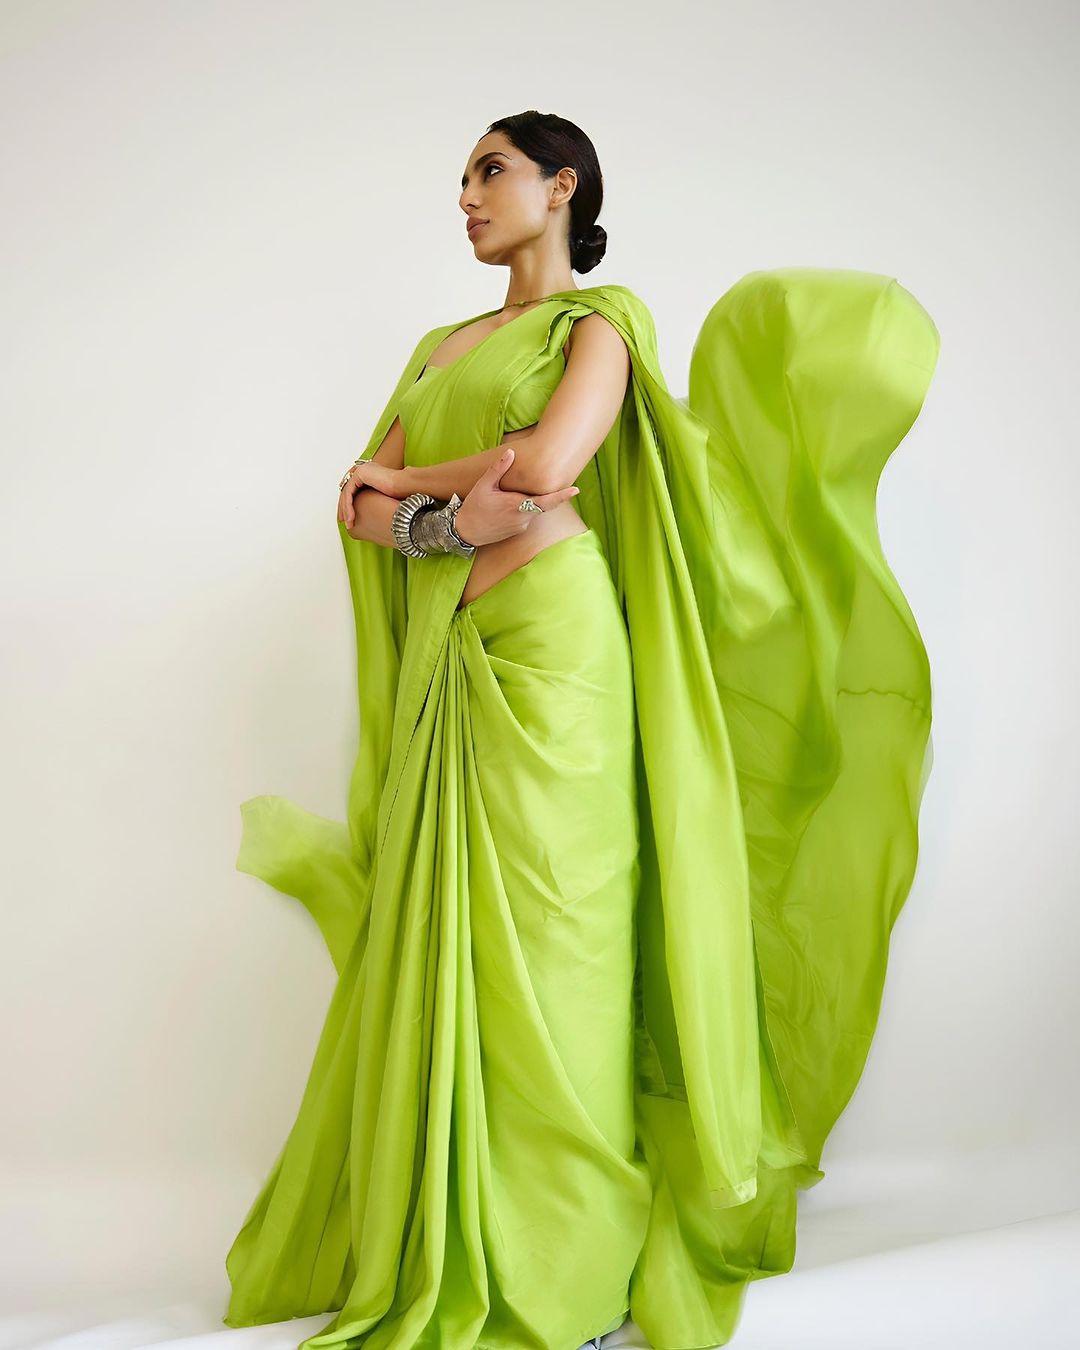 The ensemble beautifully blended tradition and modernity, reflecting Sobhita's unique fashion sensibilities